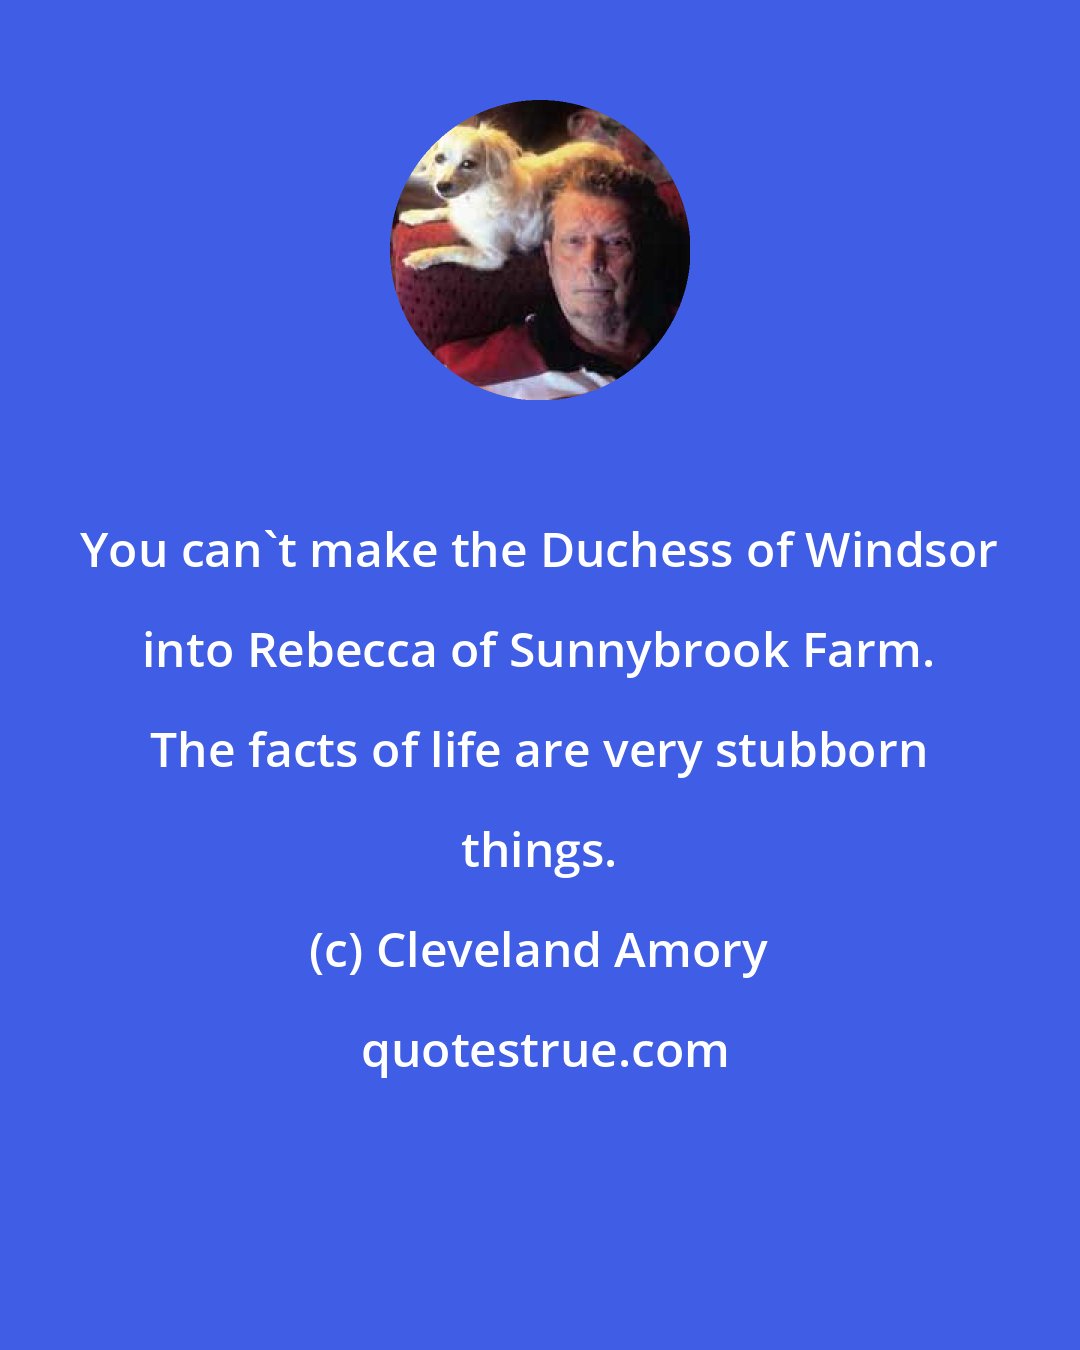 Cleveland Amory: You can't make the Duchess of Windsor into Rebecca of Sunnybrook Farm. The facts of life are very stubborn things.